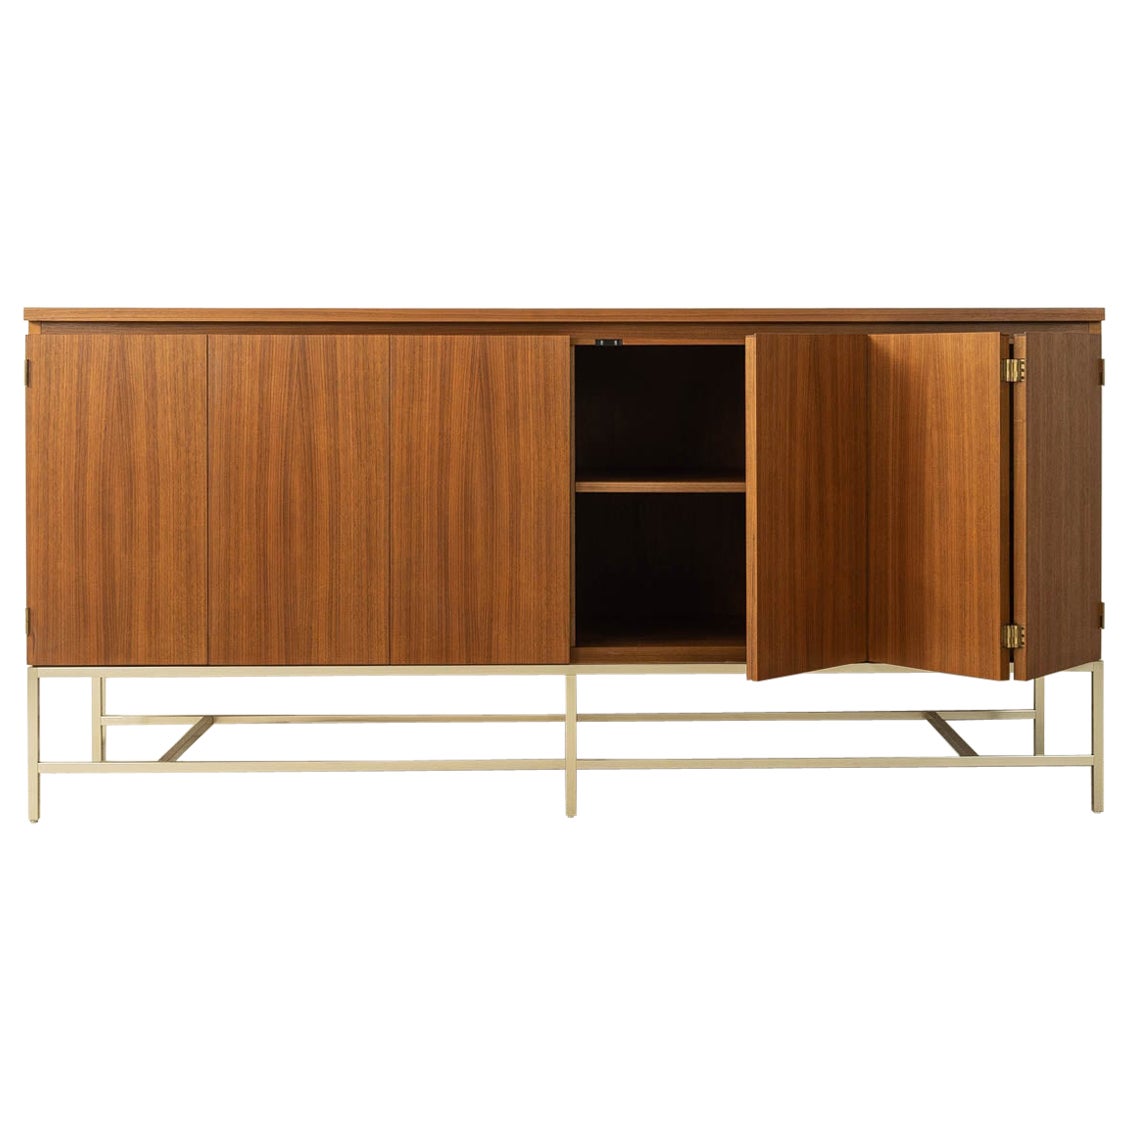 Paul McCobb Sideboard Manufactured by Wk Möbel, 1950s, Made in Germany